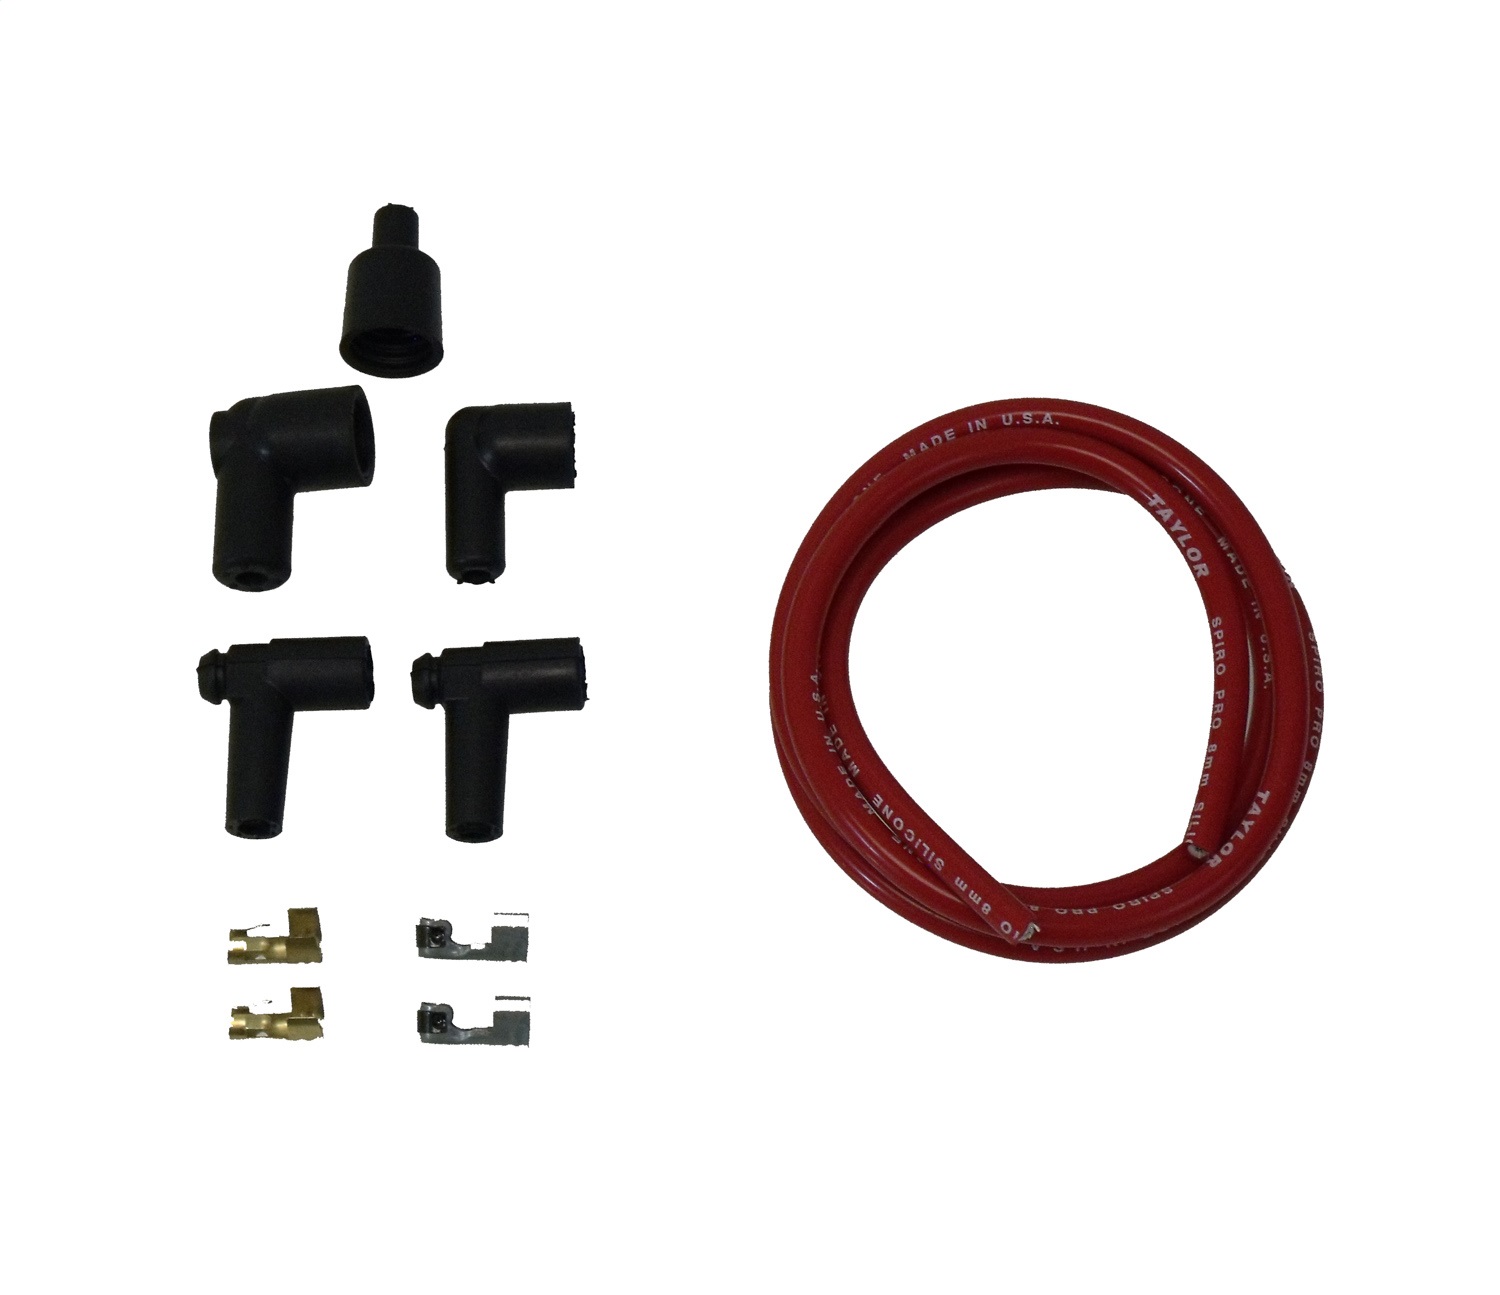 Taylor Cable Taylor Cable 45429 8mm Spiro Pro; Coil Wire Repair Kit